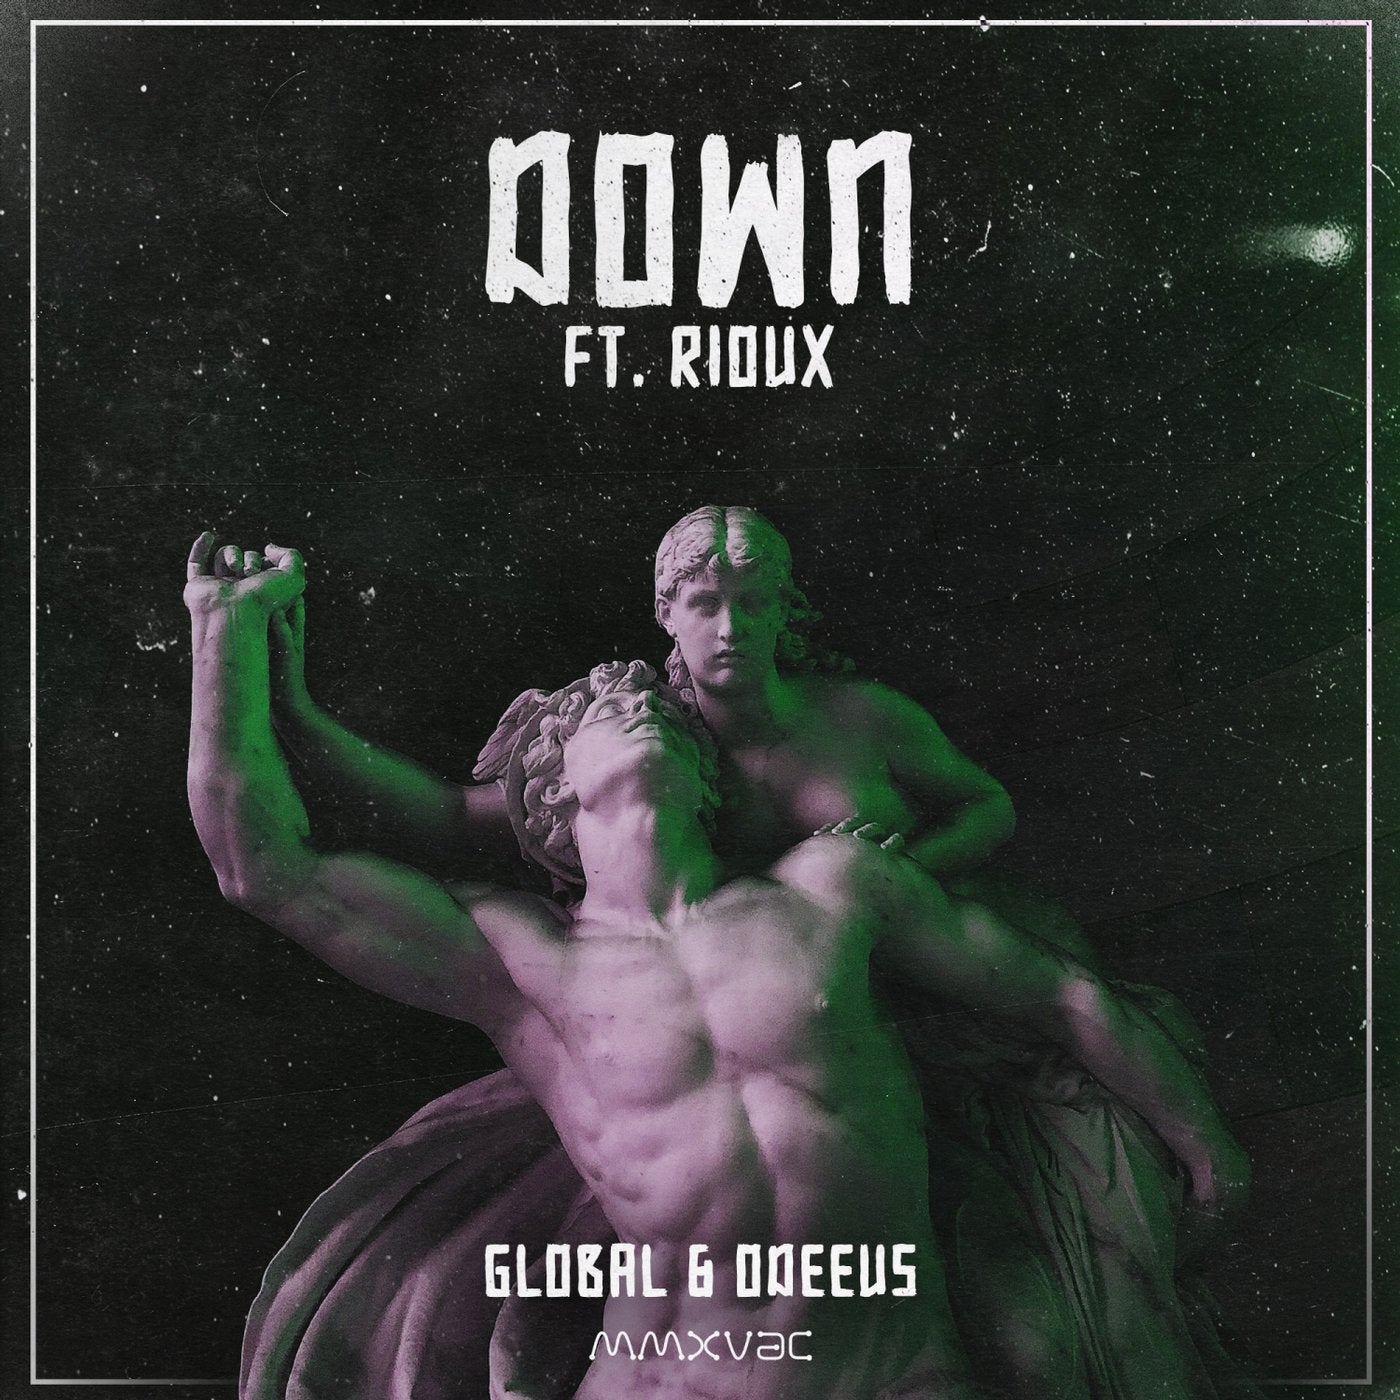 Down (feat. Rioux)